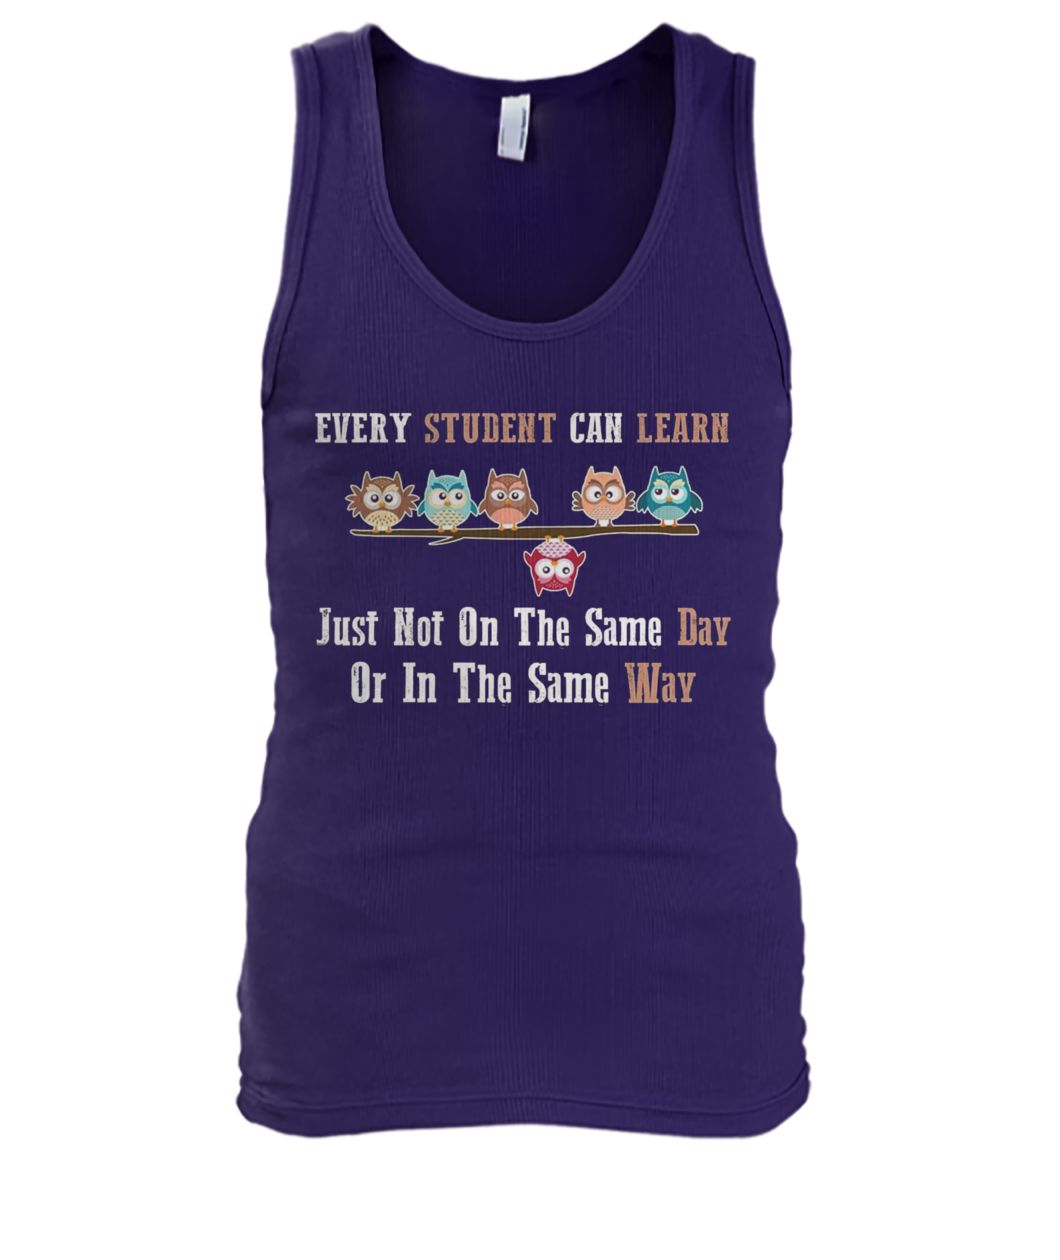 Every student can learn just not on the same day or in the same way owl men's tank top